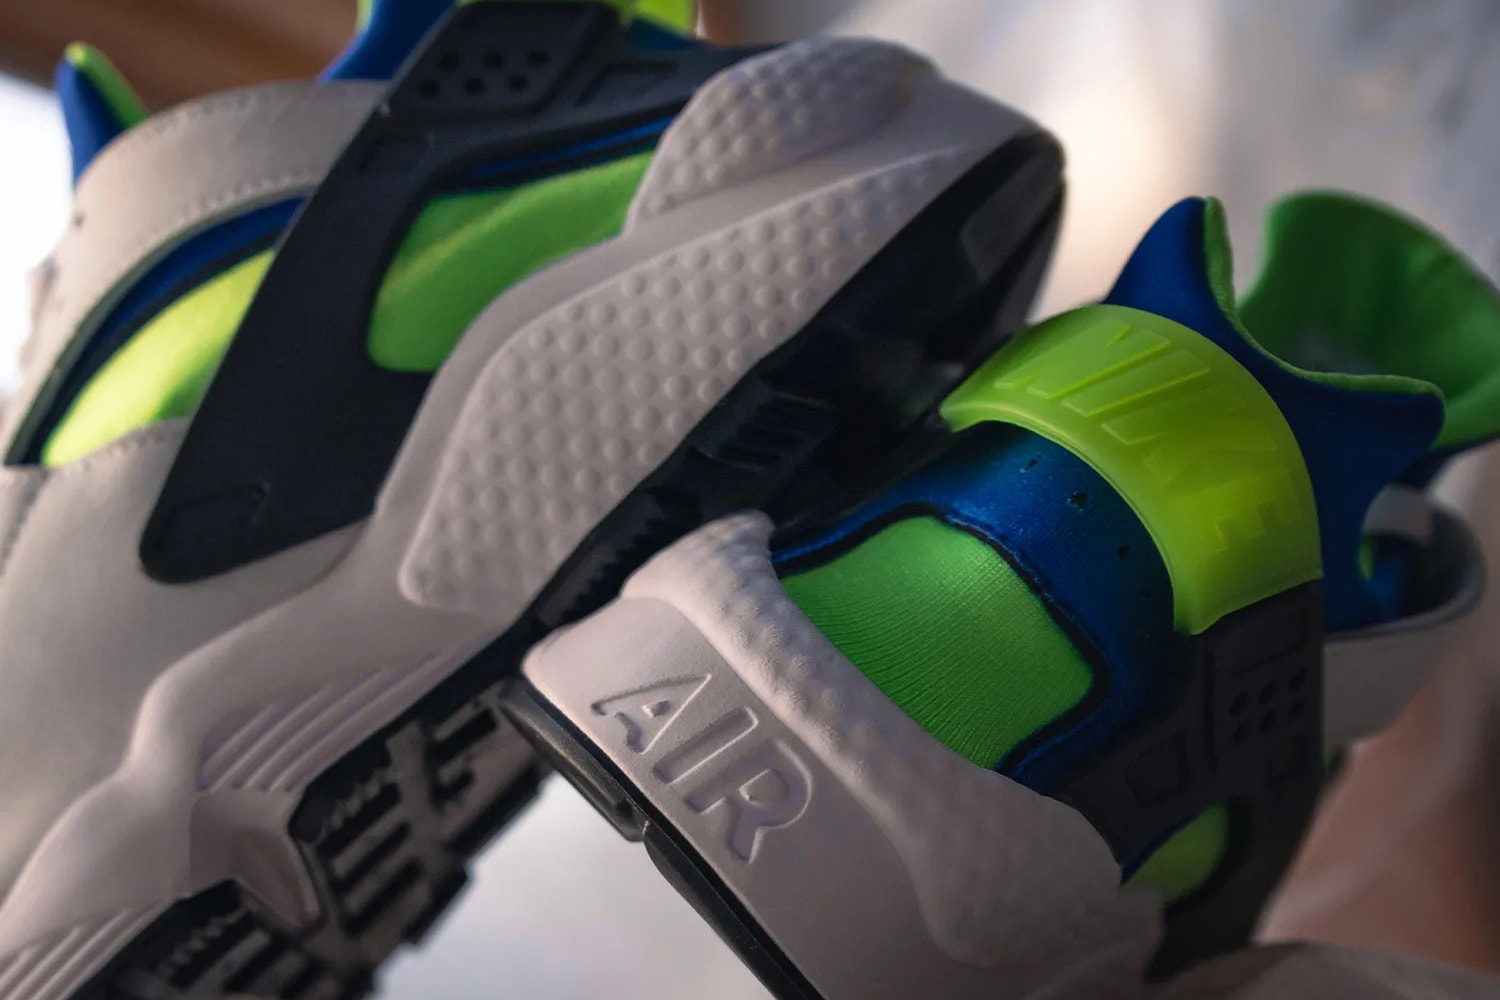 Nike Air Huarache OG "Scream Green" On-Feet Look closer detailed photographs pictures price release date info buy 130 usd retail resale dd1068-100